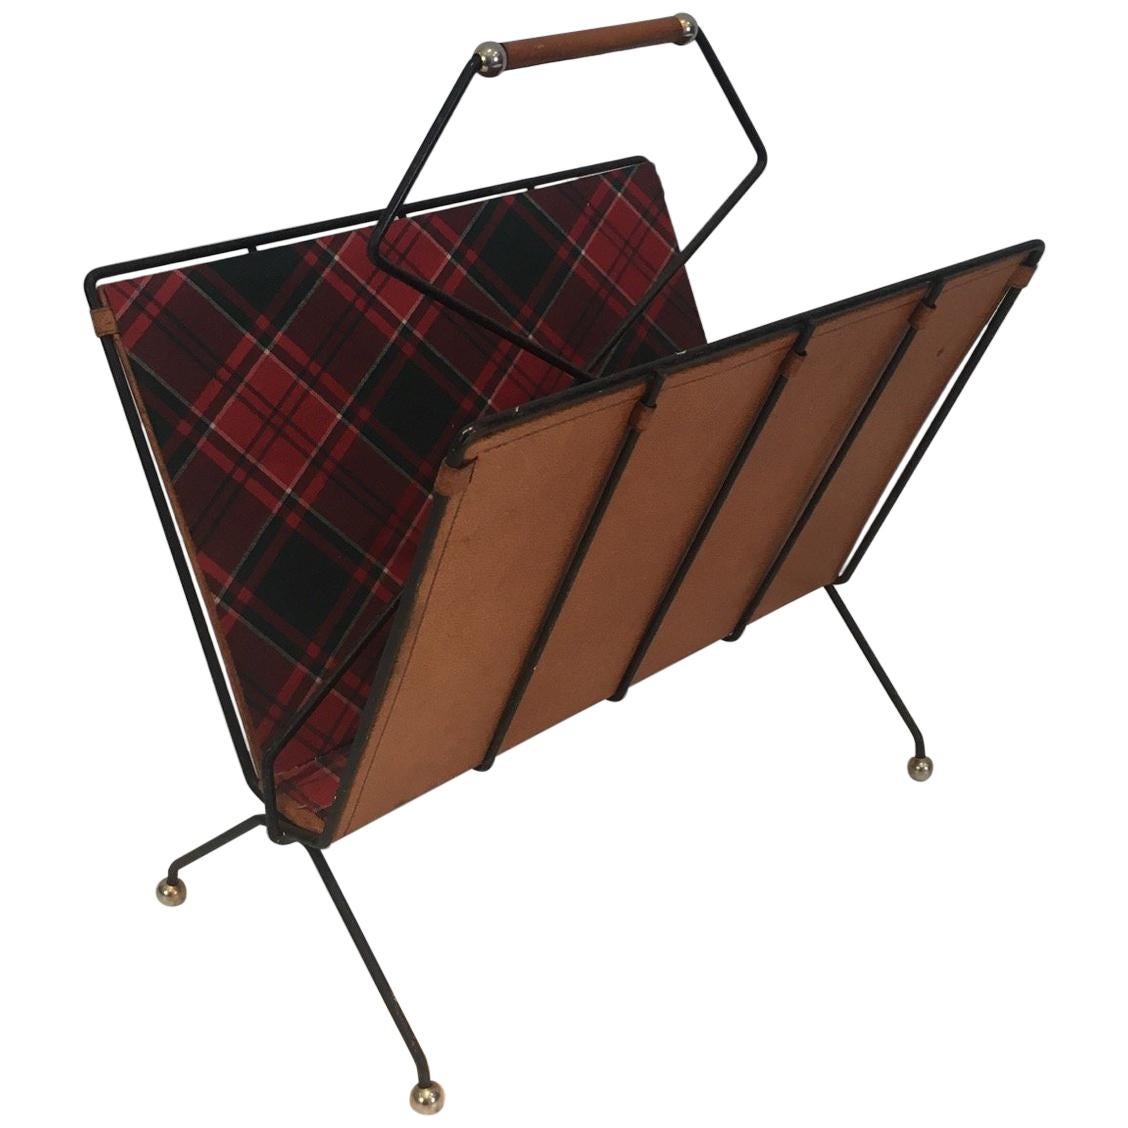 Rare Black Lacquered Metal, Leather and Plaid Fabric Magazine Rack For Sale